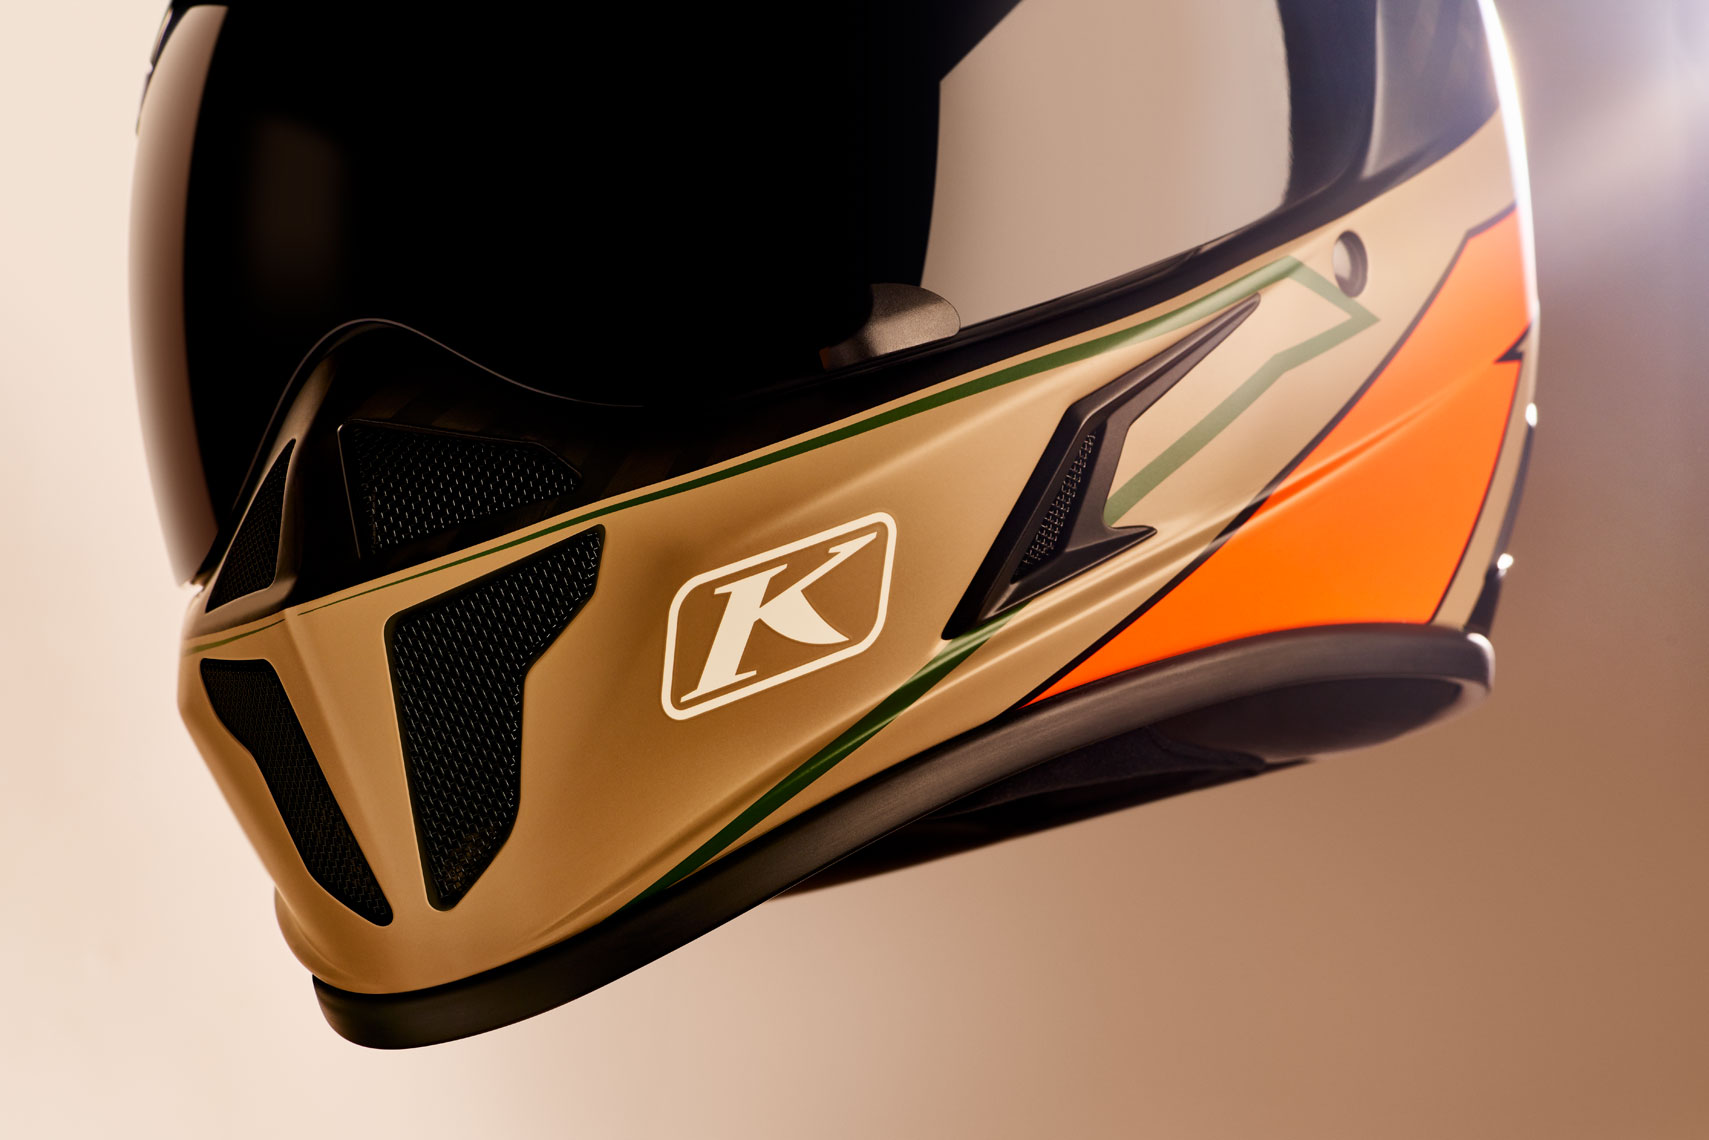 Product Photography Gear Klim Krios Adventure Motorcycle Riding Sand and Orange Off Road Helmet Denver